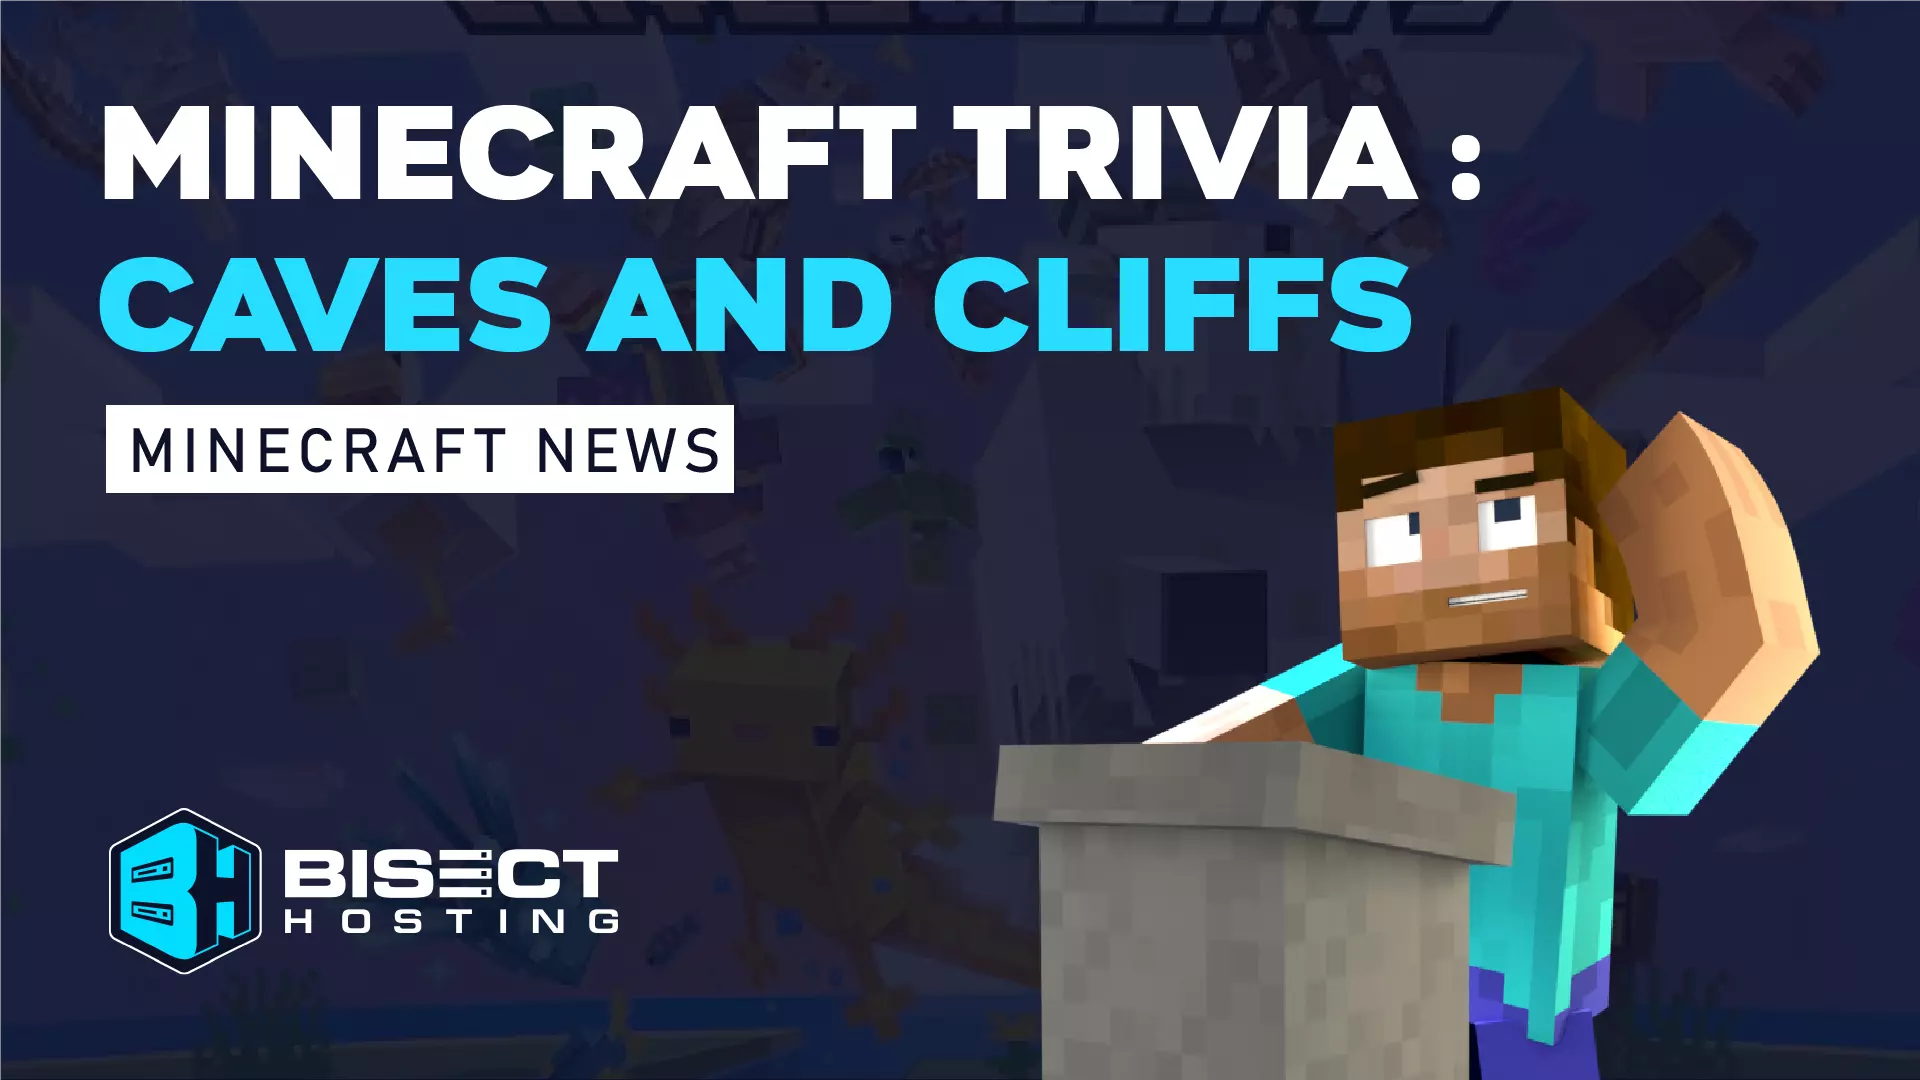 Minecraft Trivia: Caves and Cliffs